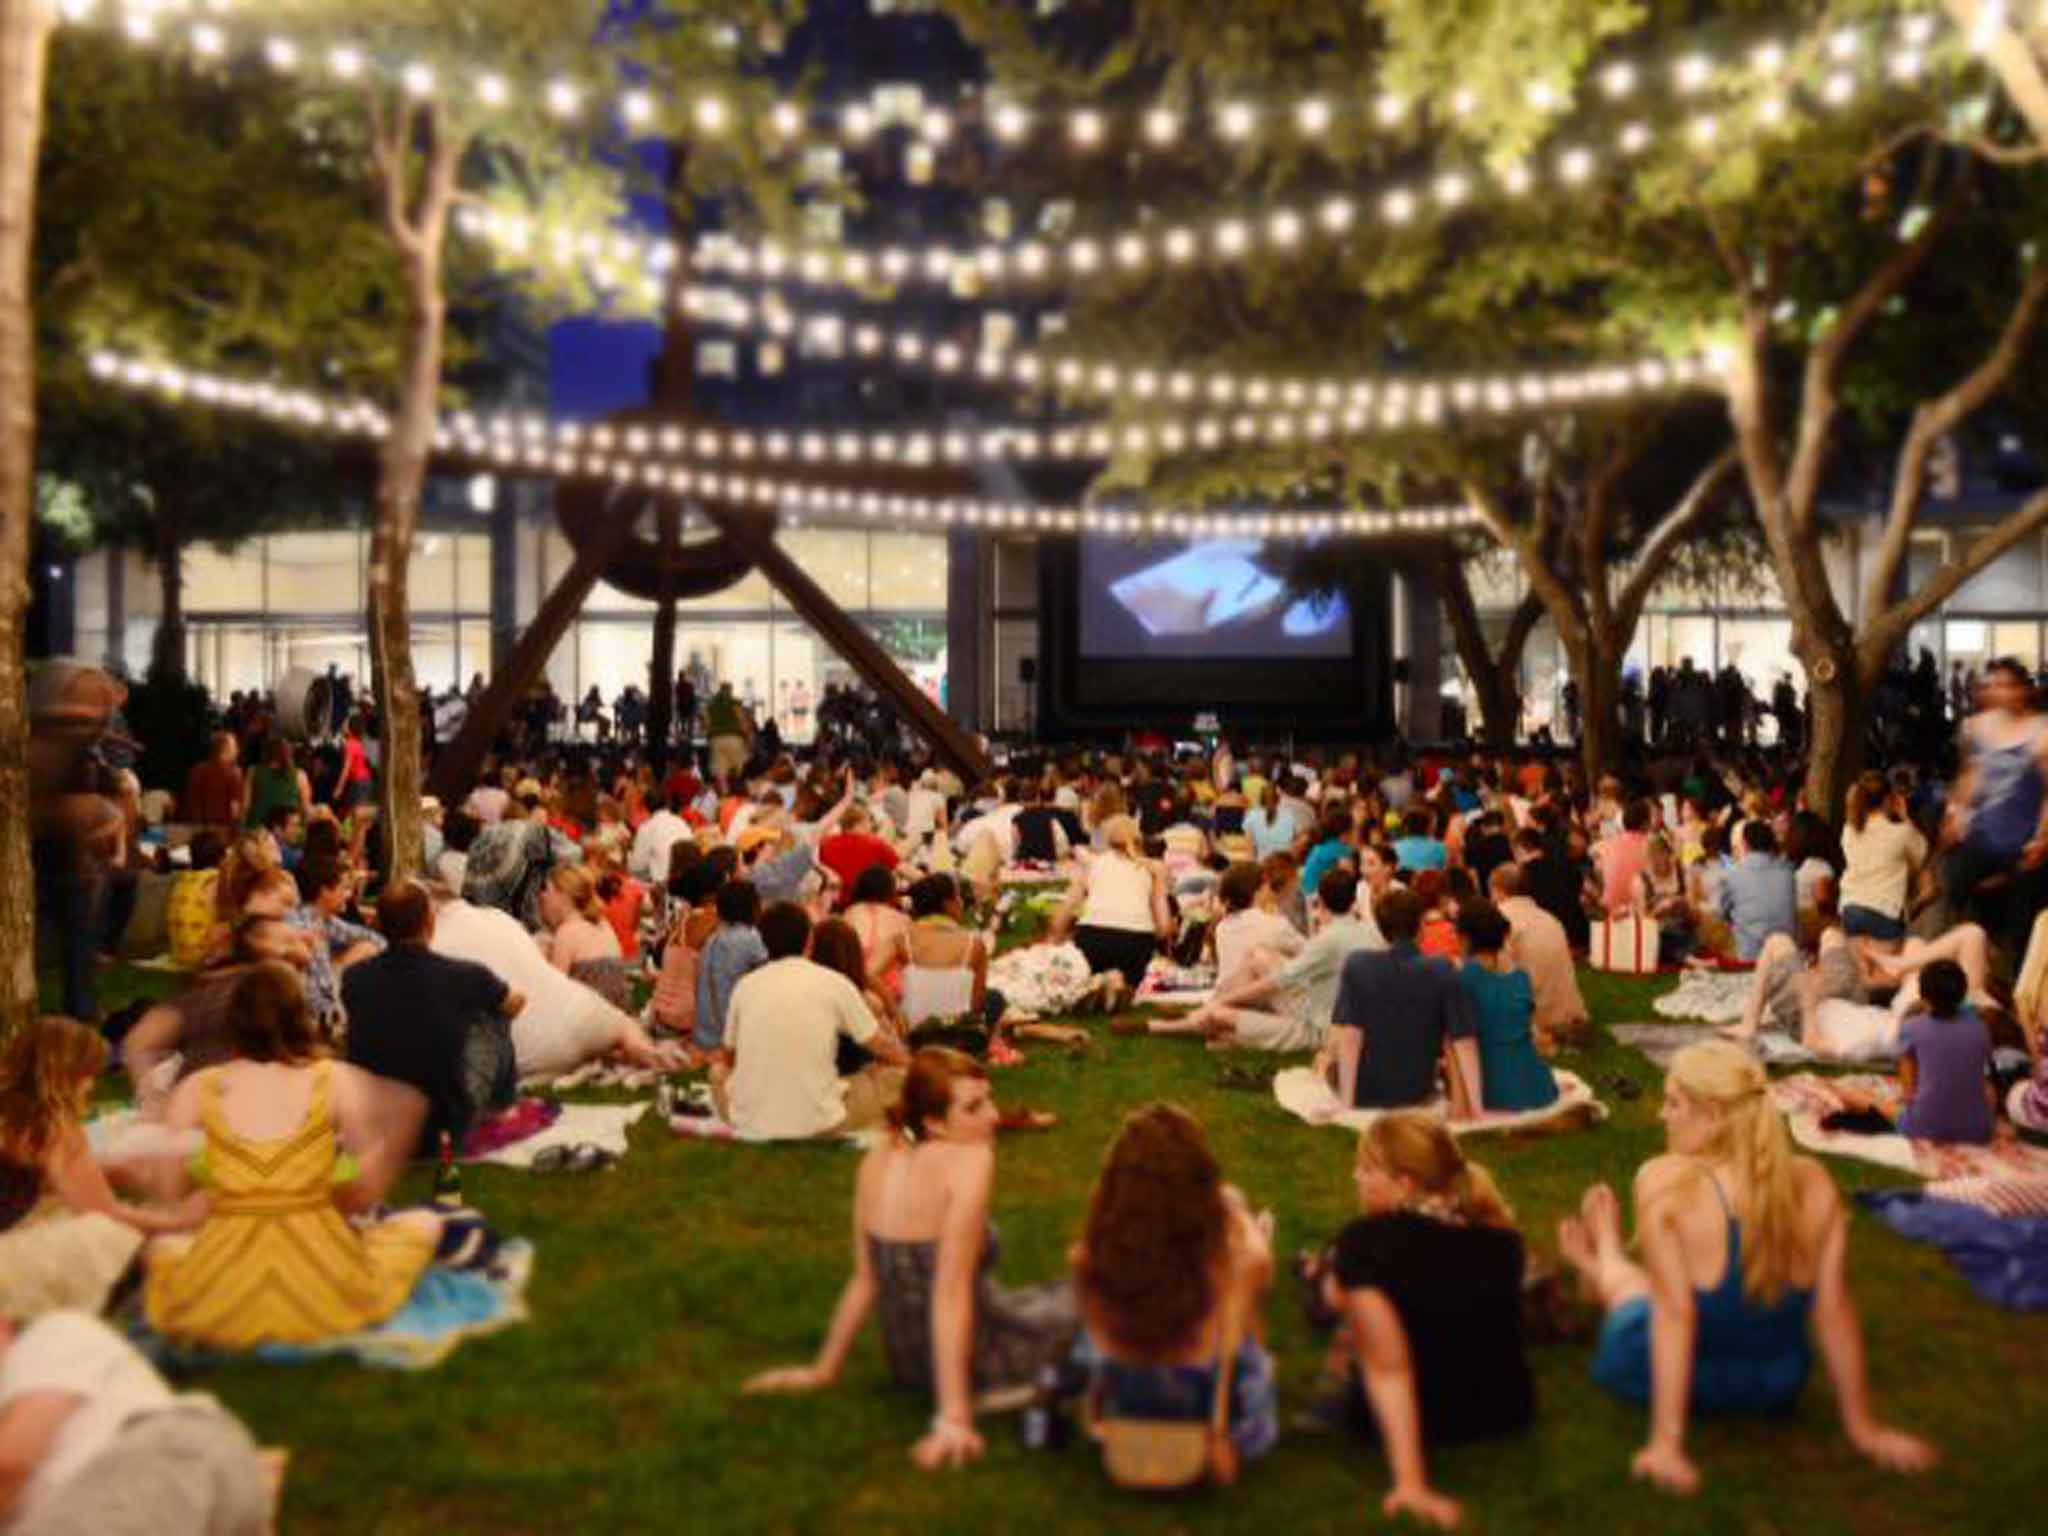 Nasher Sculpture Center hosts open-air concerts and screenings